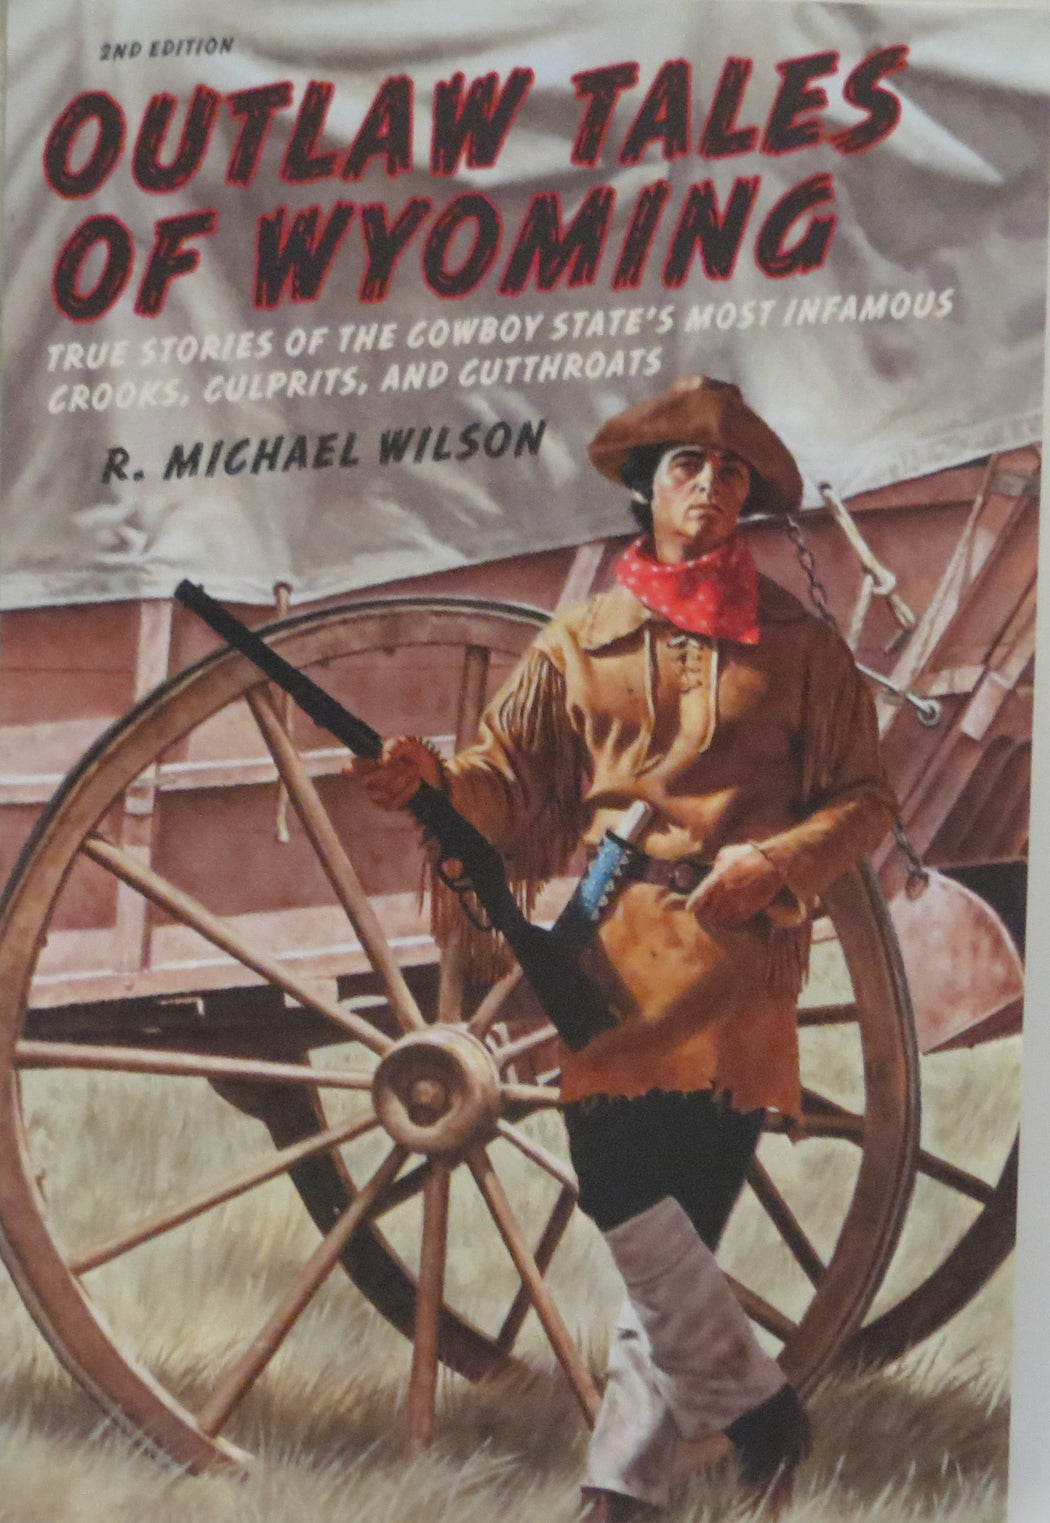 Outlaw tales of Wyoming